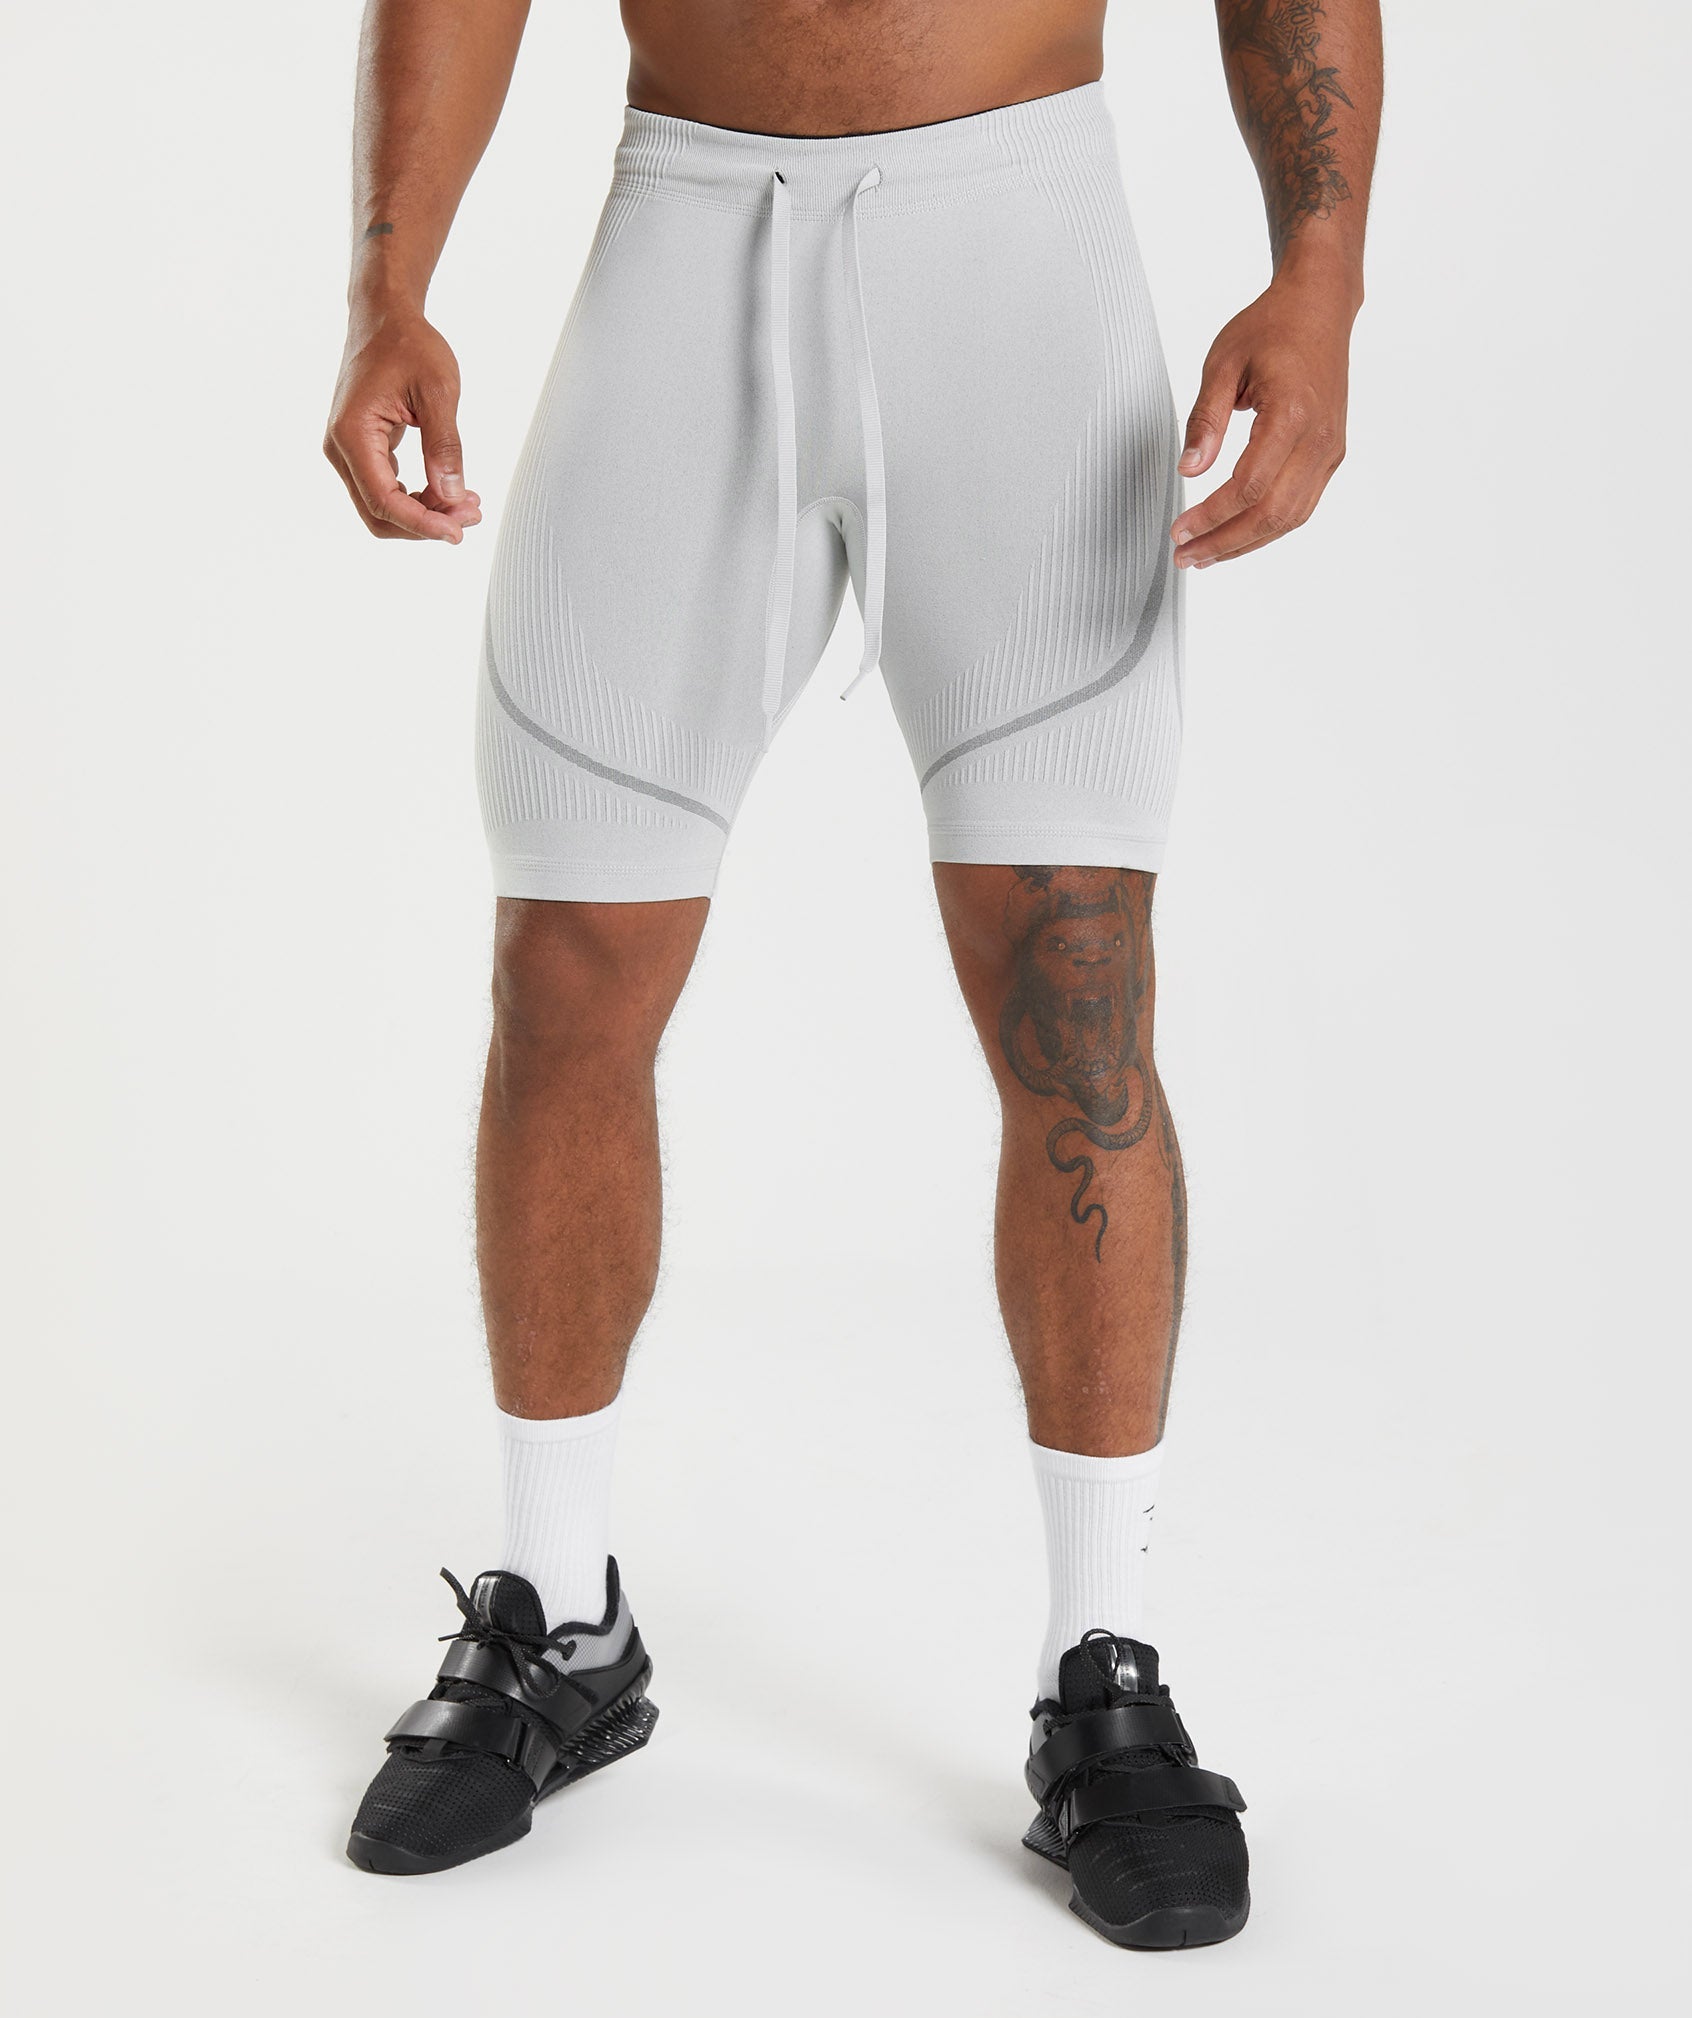 315 Seamless 1/2 Shorts in Light Grey/Charcoal Grey - view 1